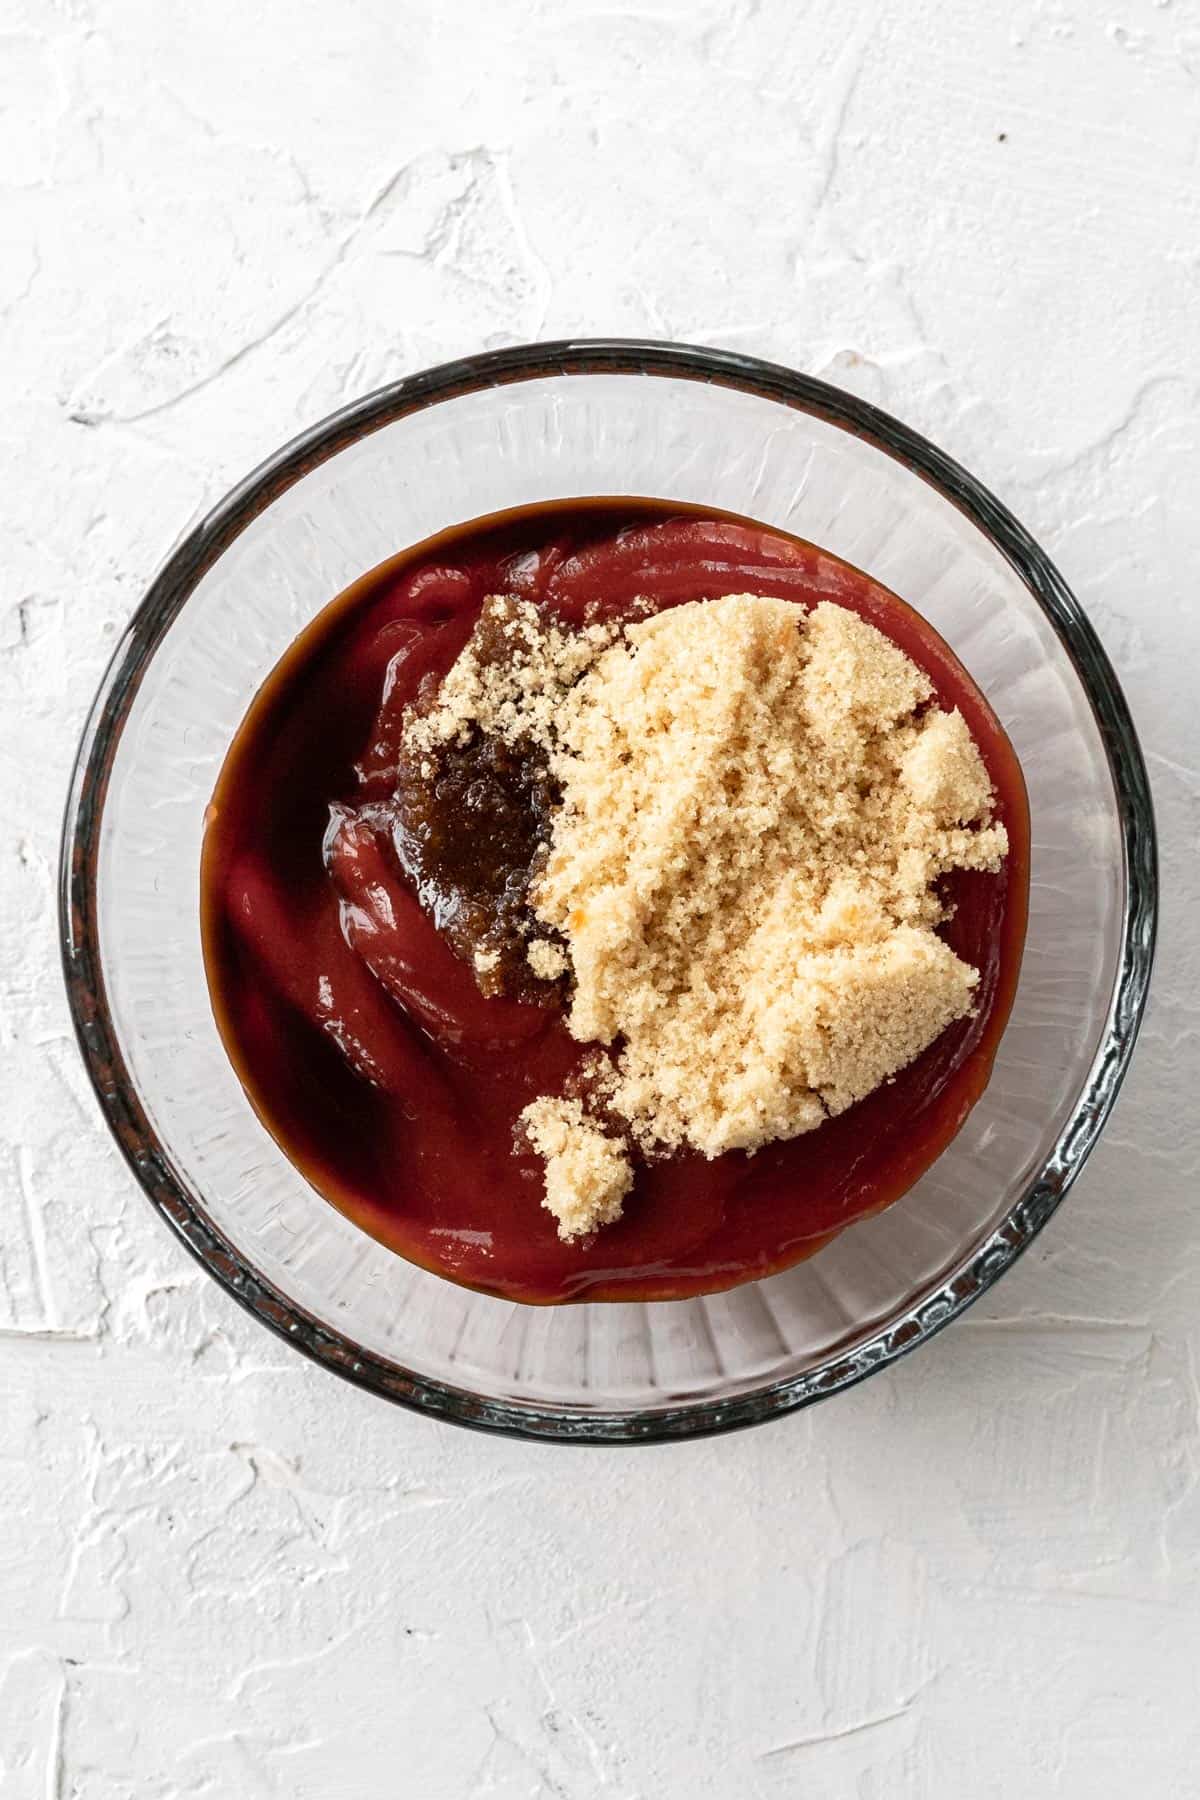 Ketchup topped with brown sugar and Worcestershire sauce in a glass bowl.